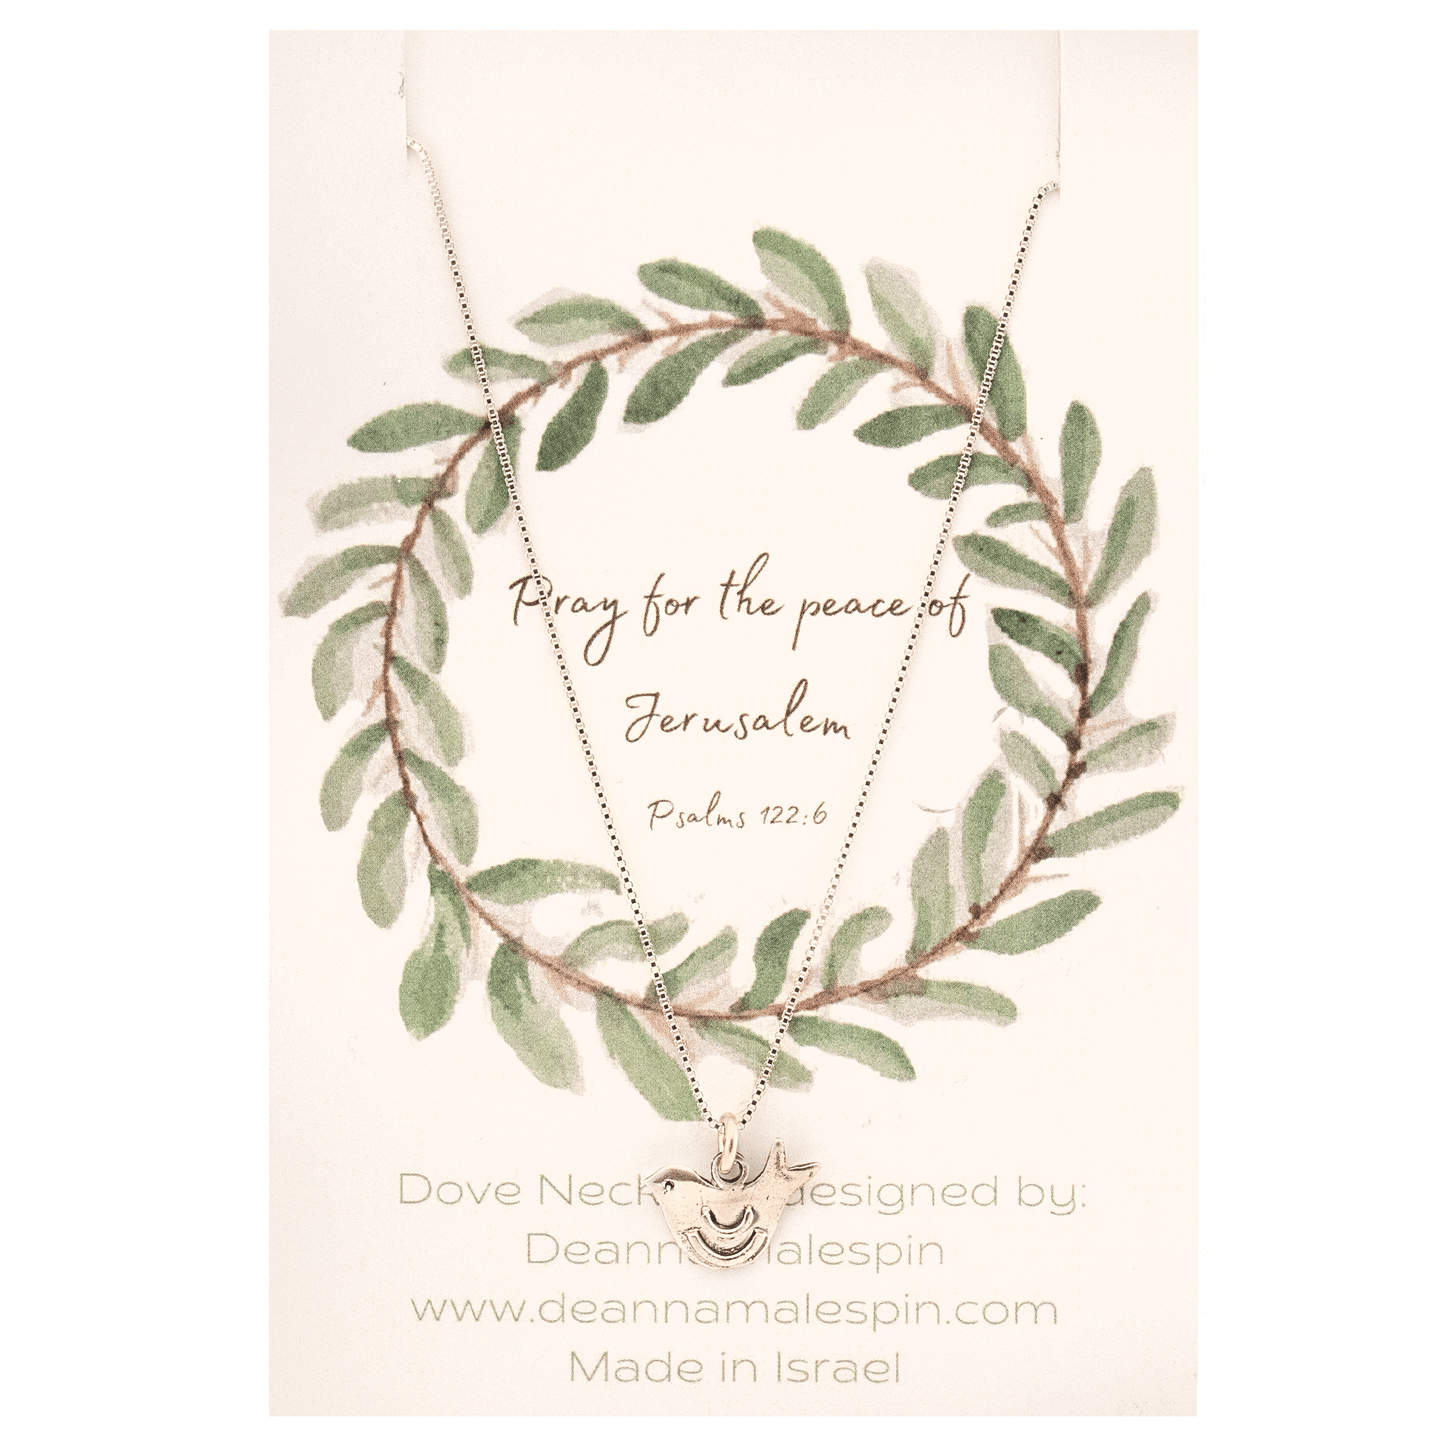 Silver Dove pendant on a silver chain hung on Psalms 122:6 card